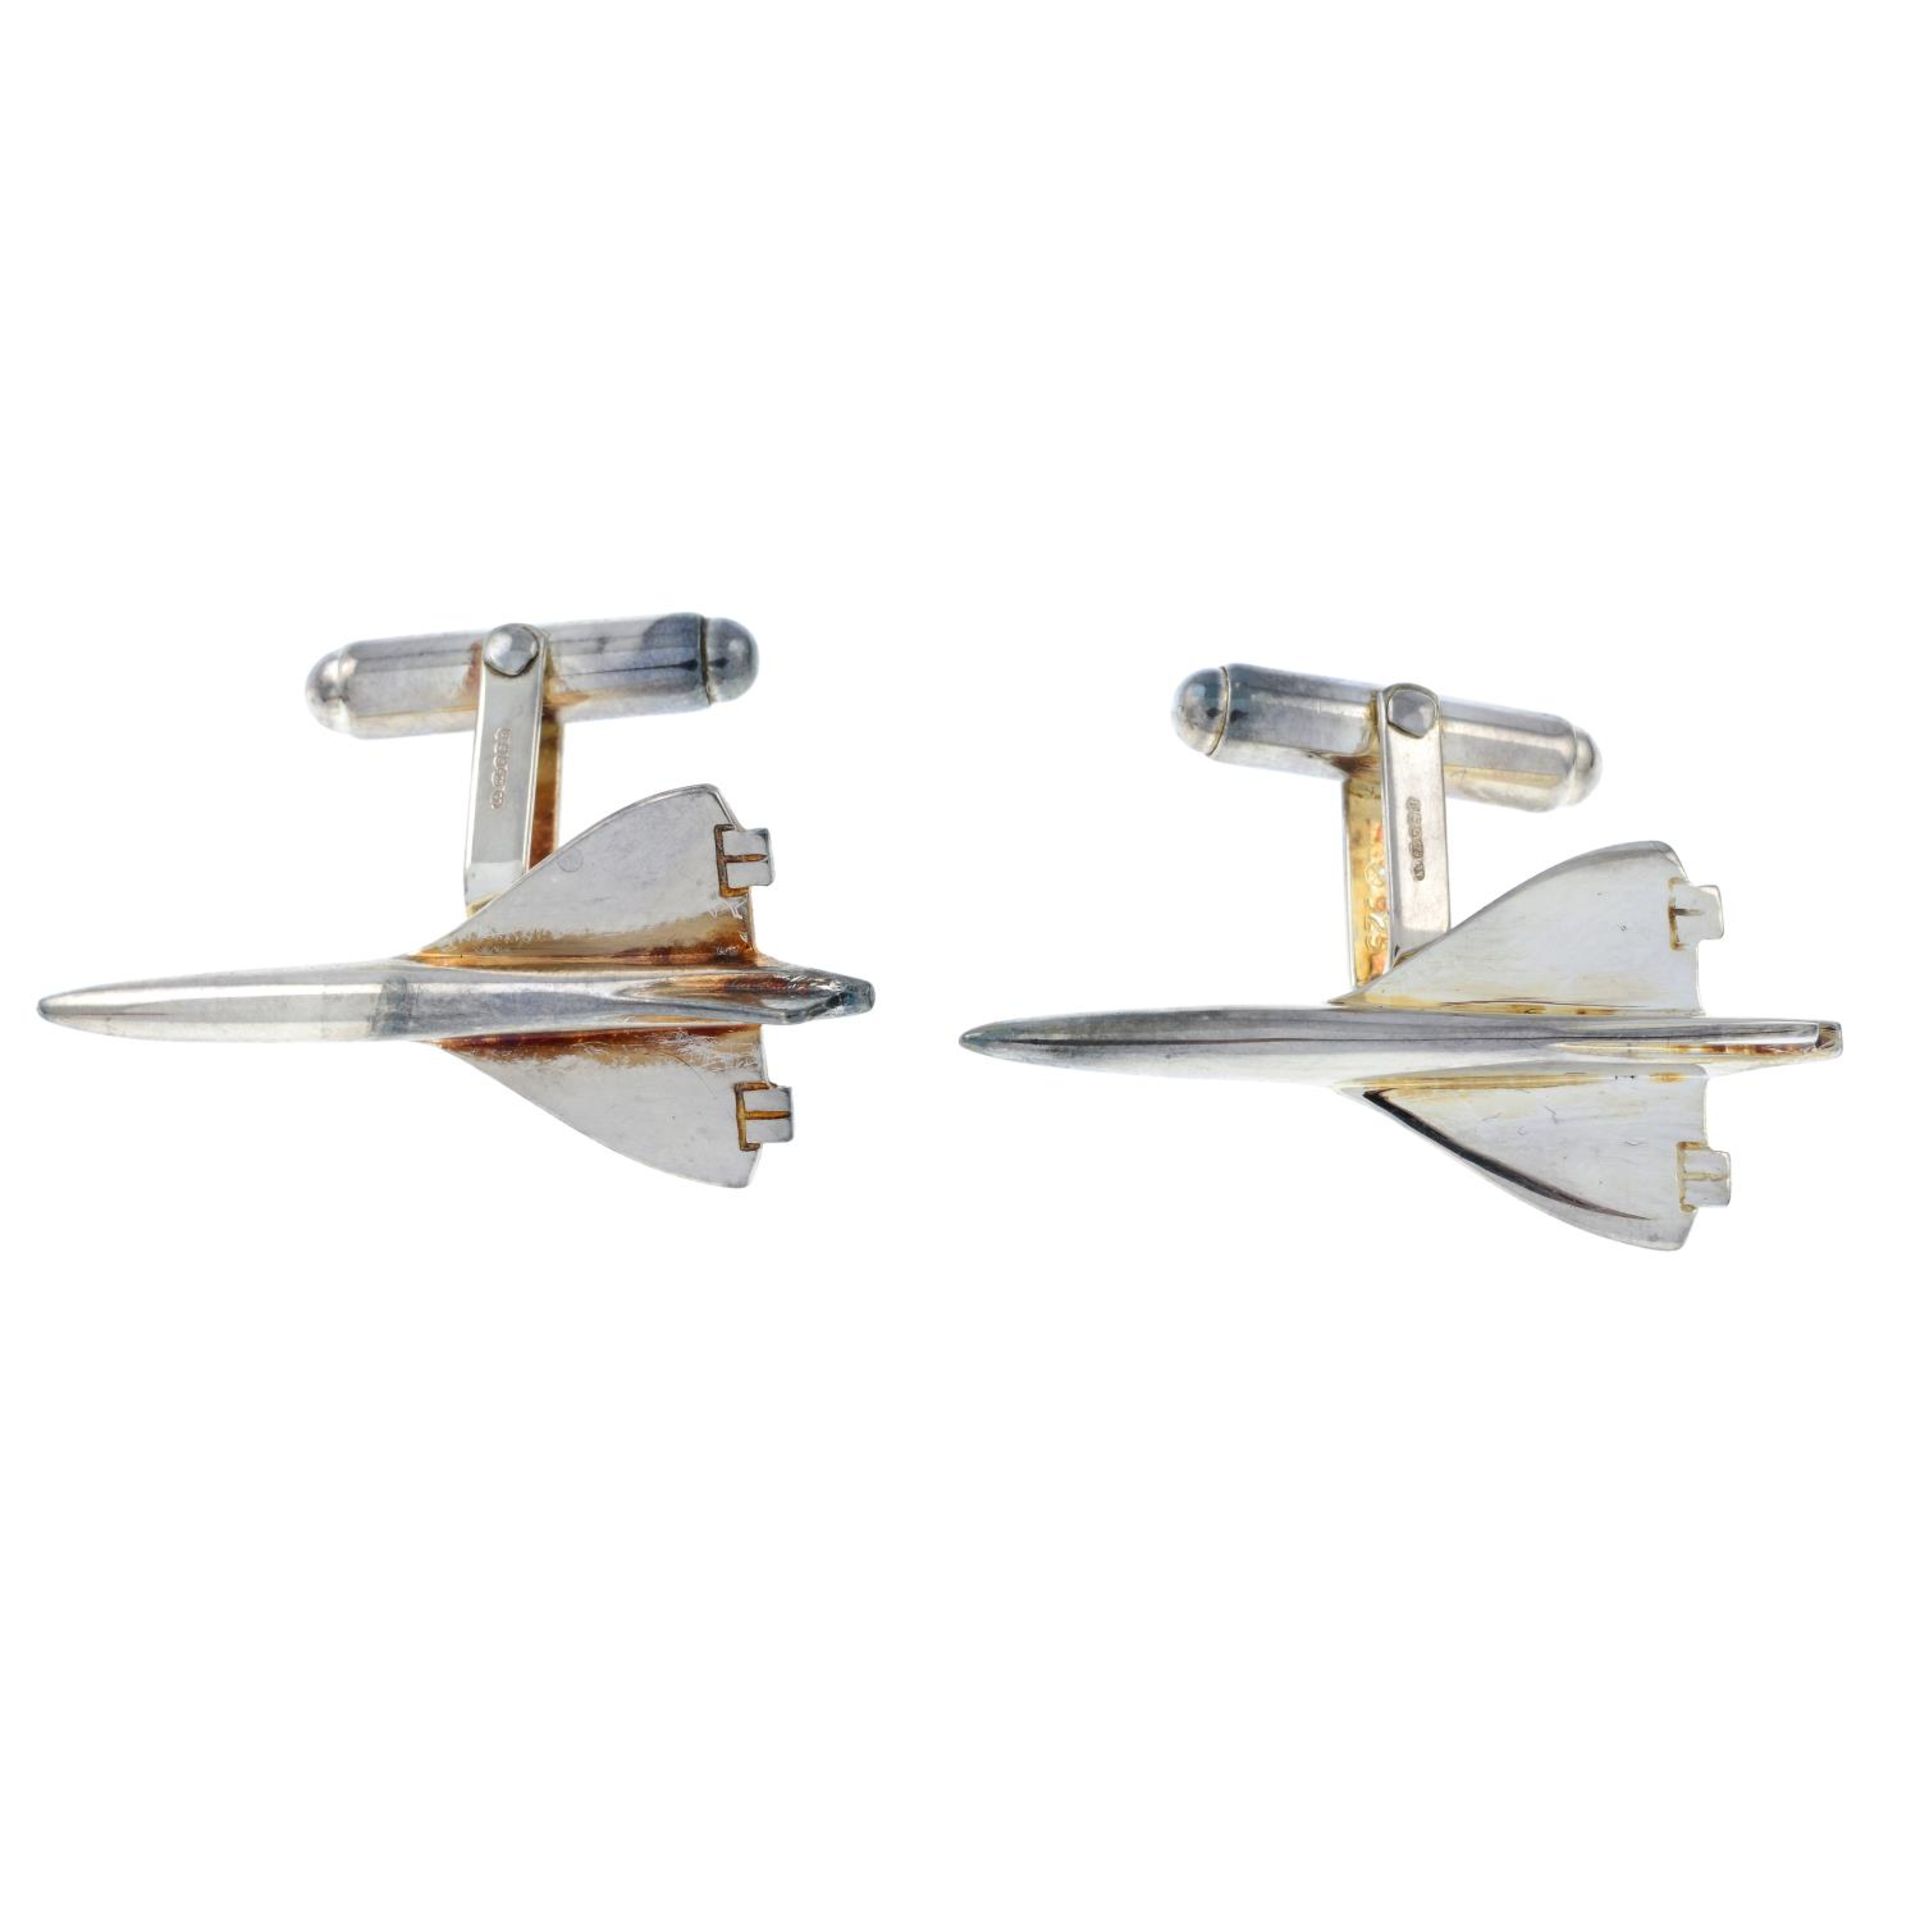 A pair of silver Concorde cufflinks, by Links of London.With maker's marks for Links of London.